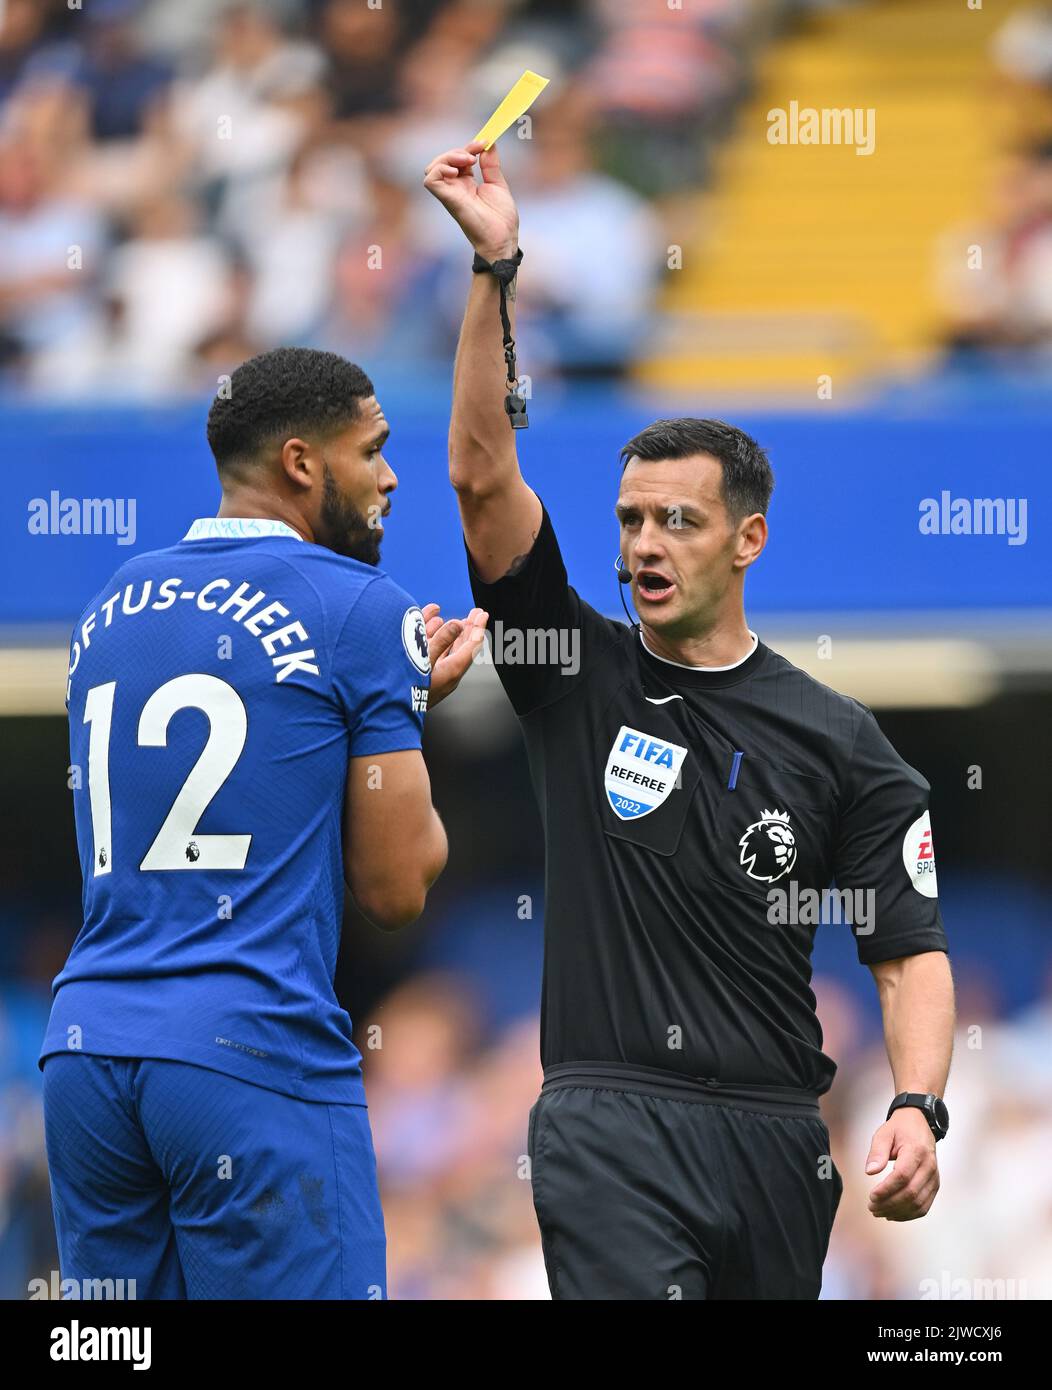 03 Sep 2022 - Chelsea v West Ham United - Premier League - Stamford Bridge  Referee Andy Madley shows the yellow card to Ruben Loftus-Cheek during the match at Stamford Bridge  Picture : Mark Pain / Alamy Live News Stock Photo